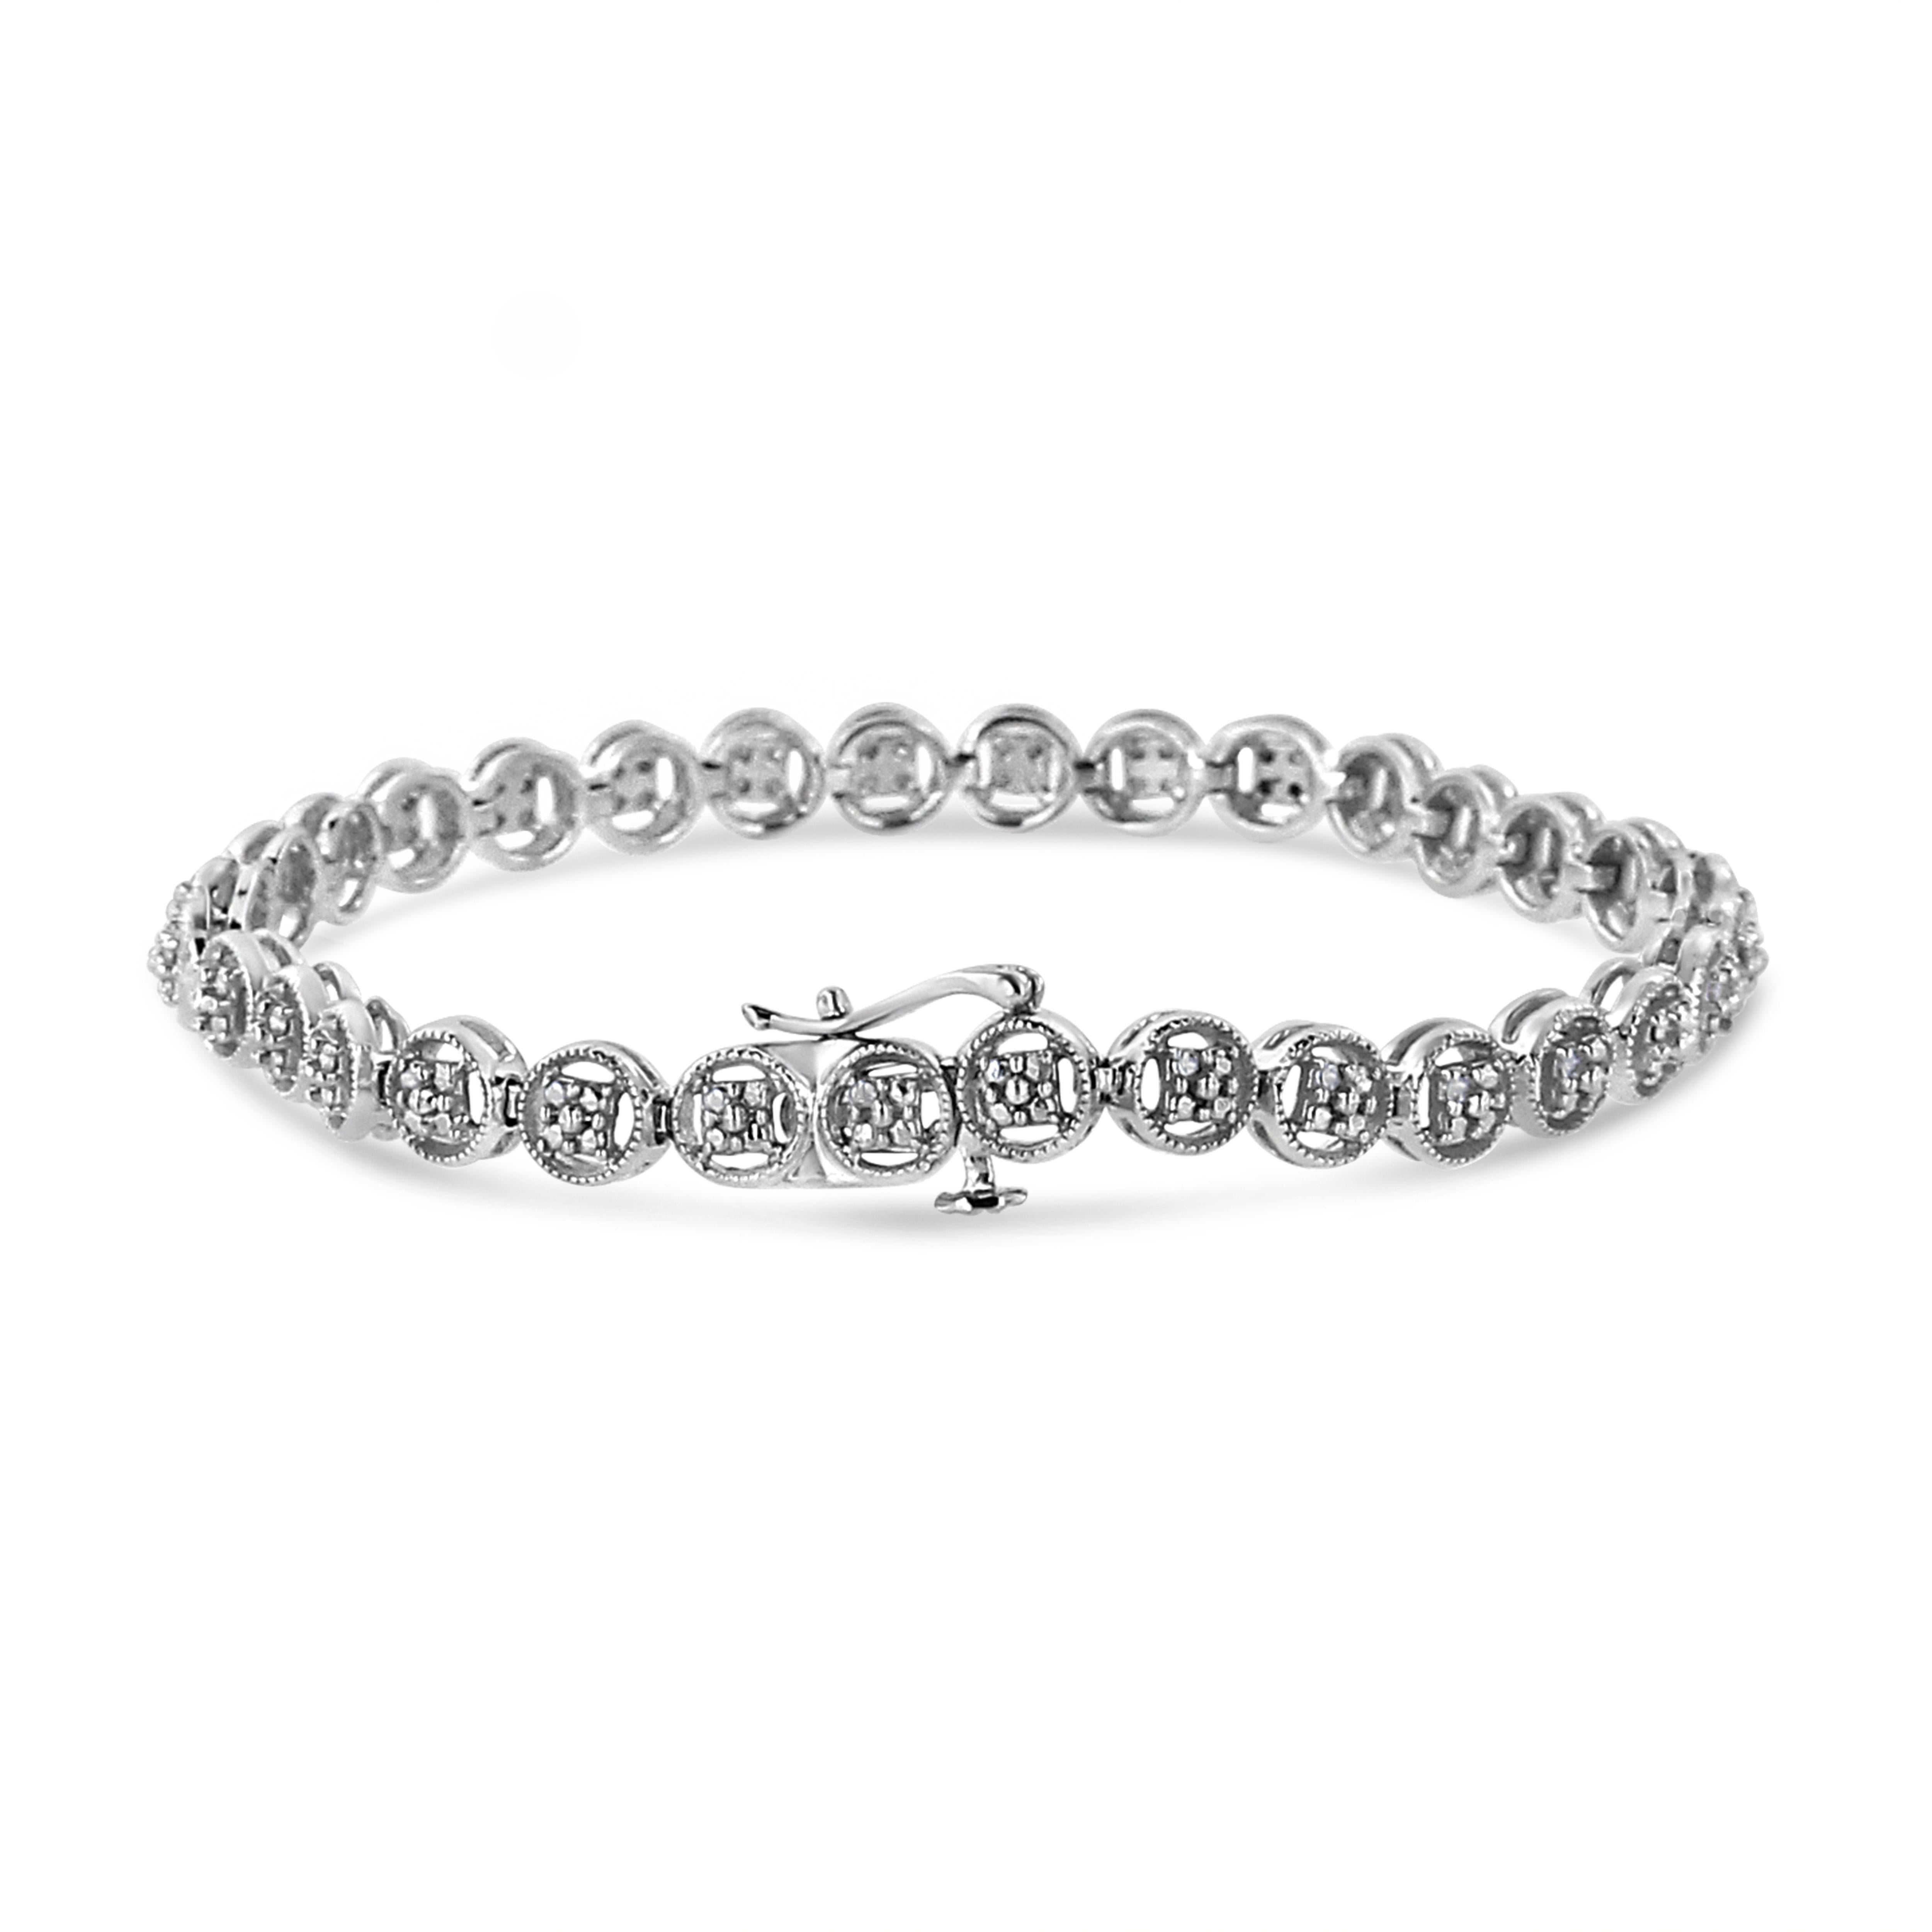 Elegant and timeless, this gorgeous .925 sterling silver tennis bracelet features 0.11 carat total weight of round, brilliant cut diamonds nestled in the center of open wheel shaped links decorated with studs that mimic the appearance of stones. The